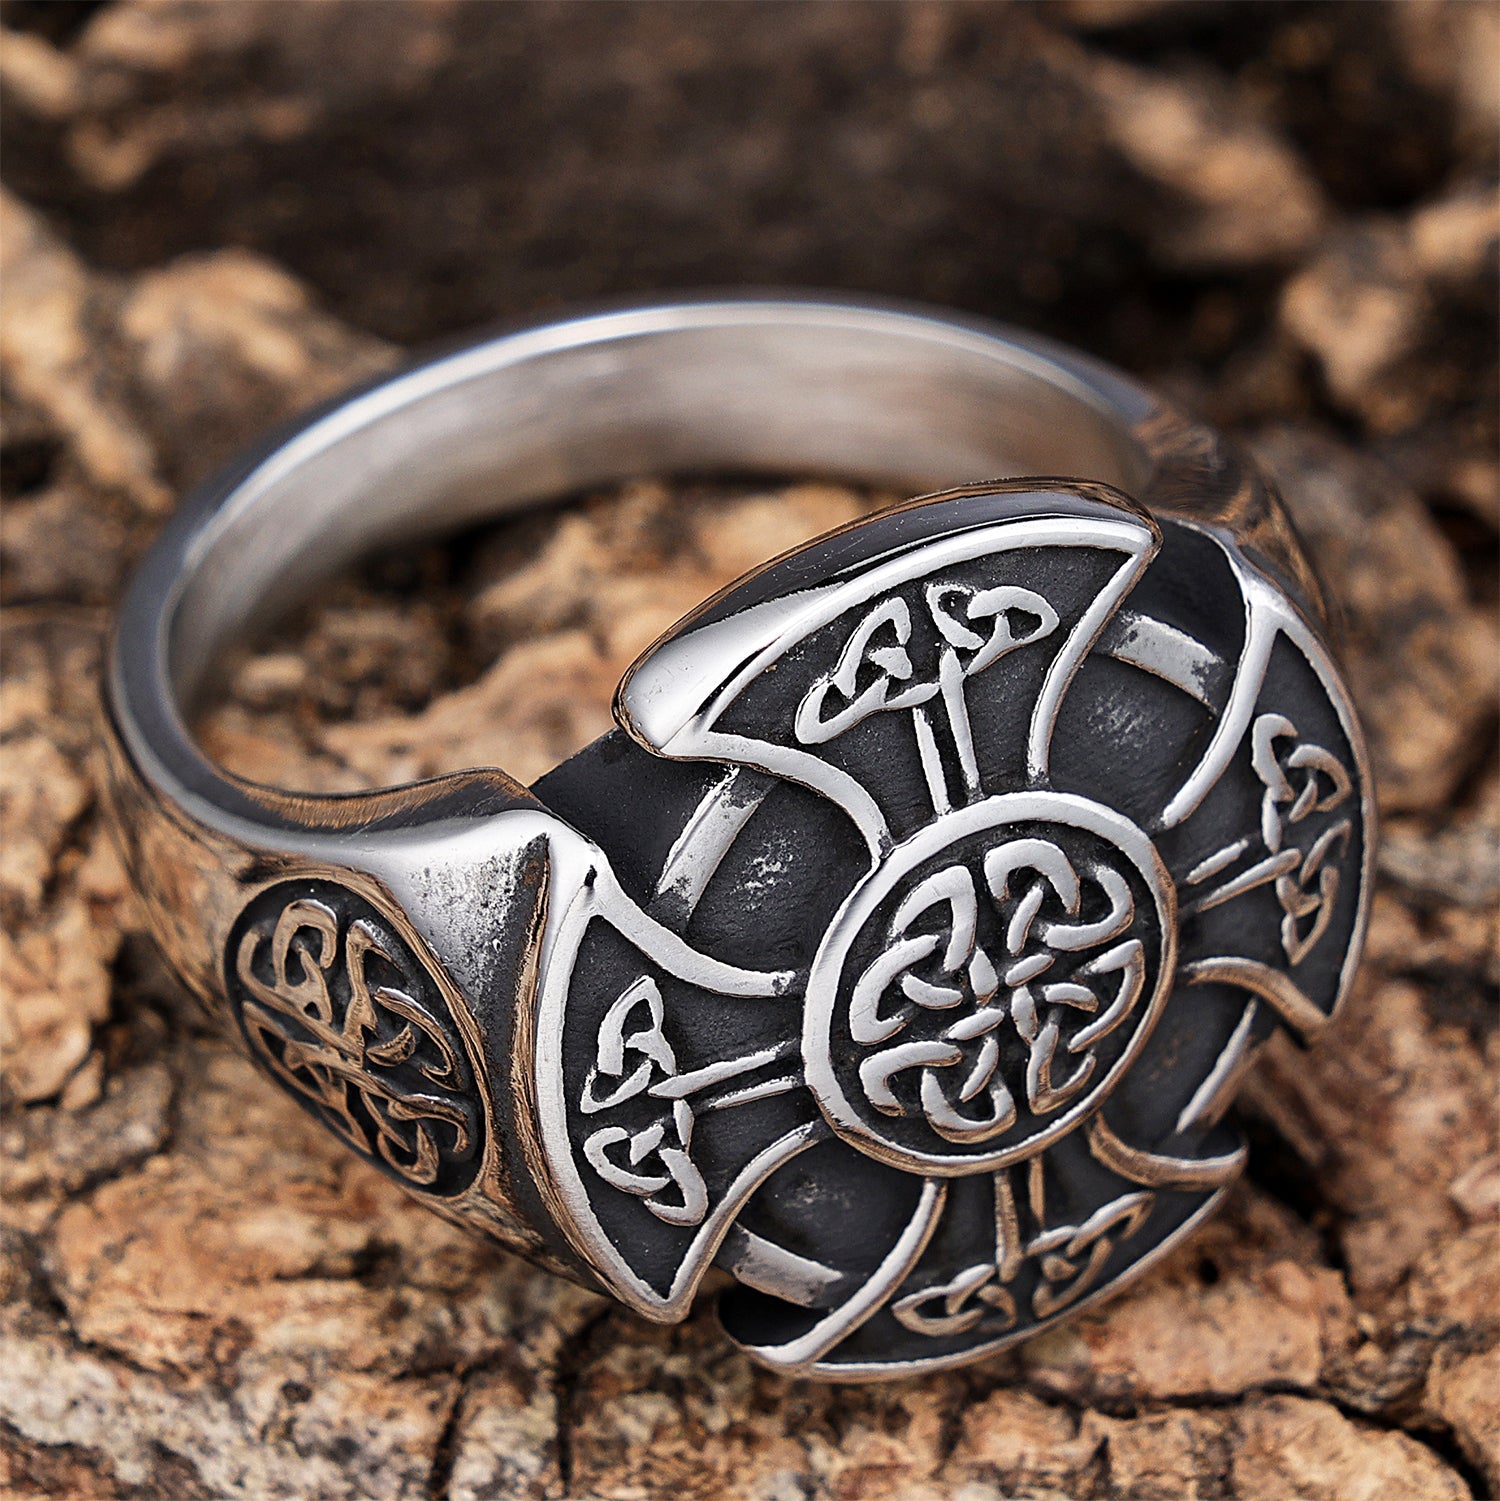 Equal-armed Celtic Cross Ring with Inner Circle